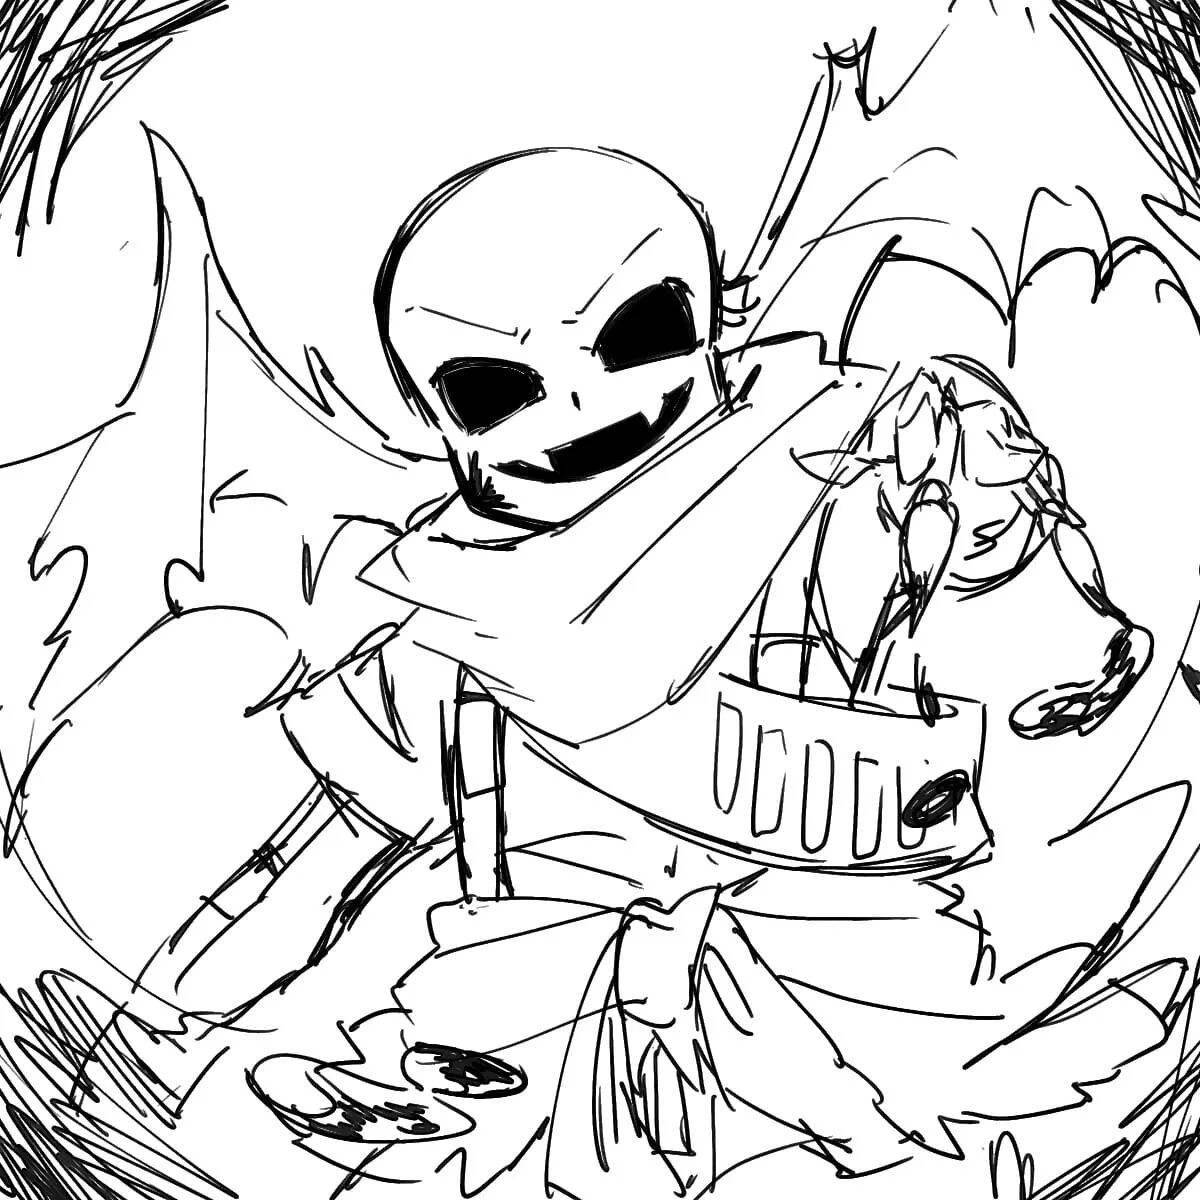 Amazing ink sans coloring page